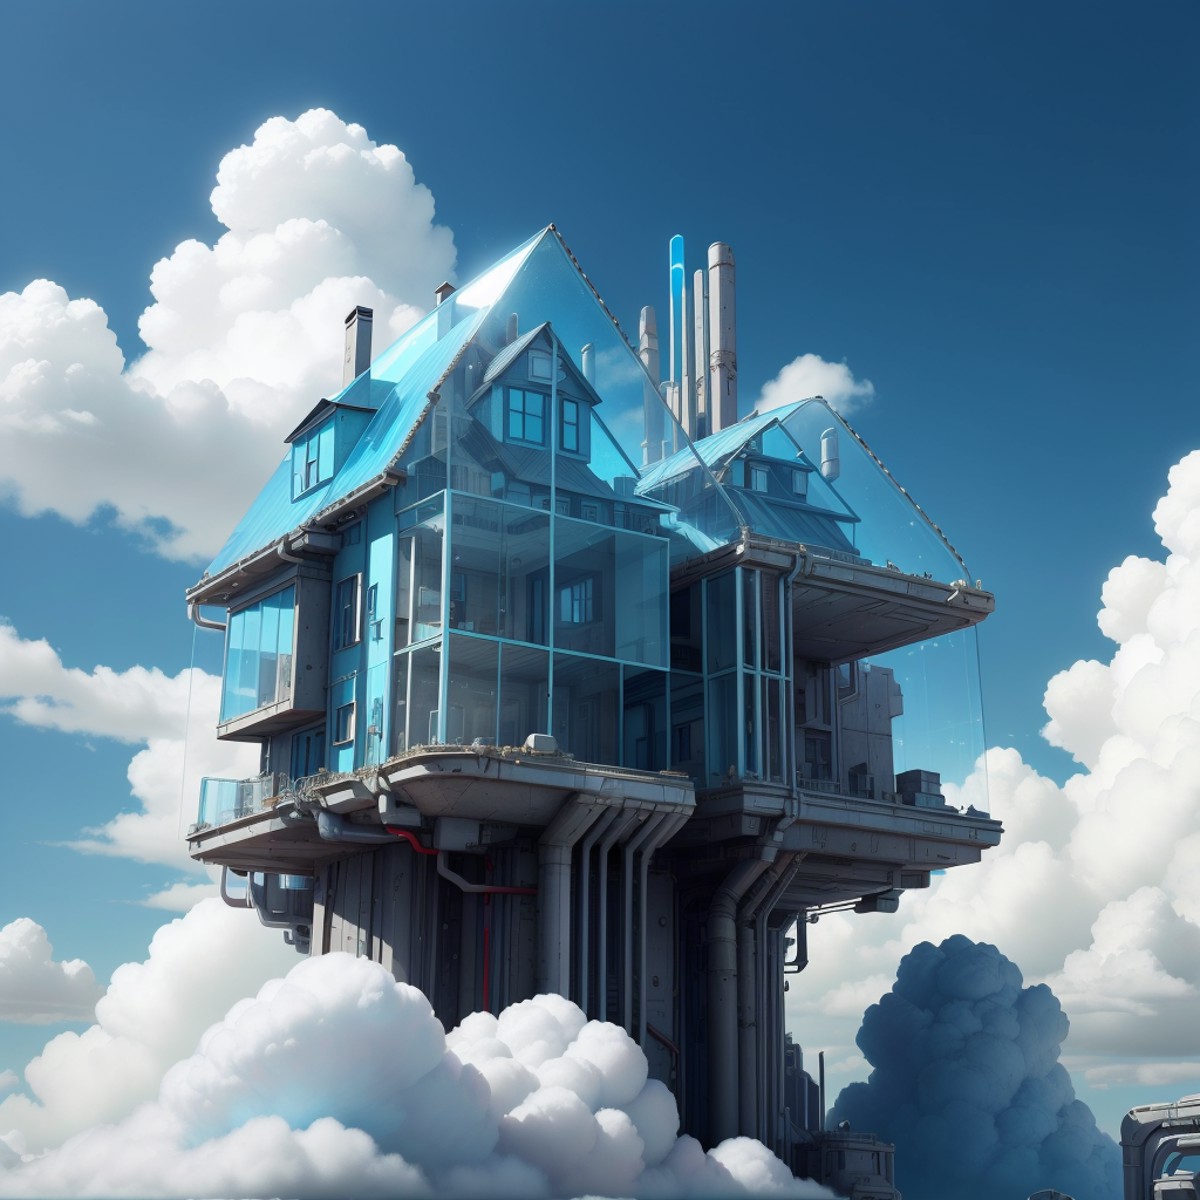 07961-12347-,plasttech,synthetic,transparent , scifi,_house on a hill, blue sky, clouds.png